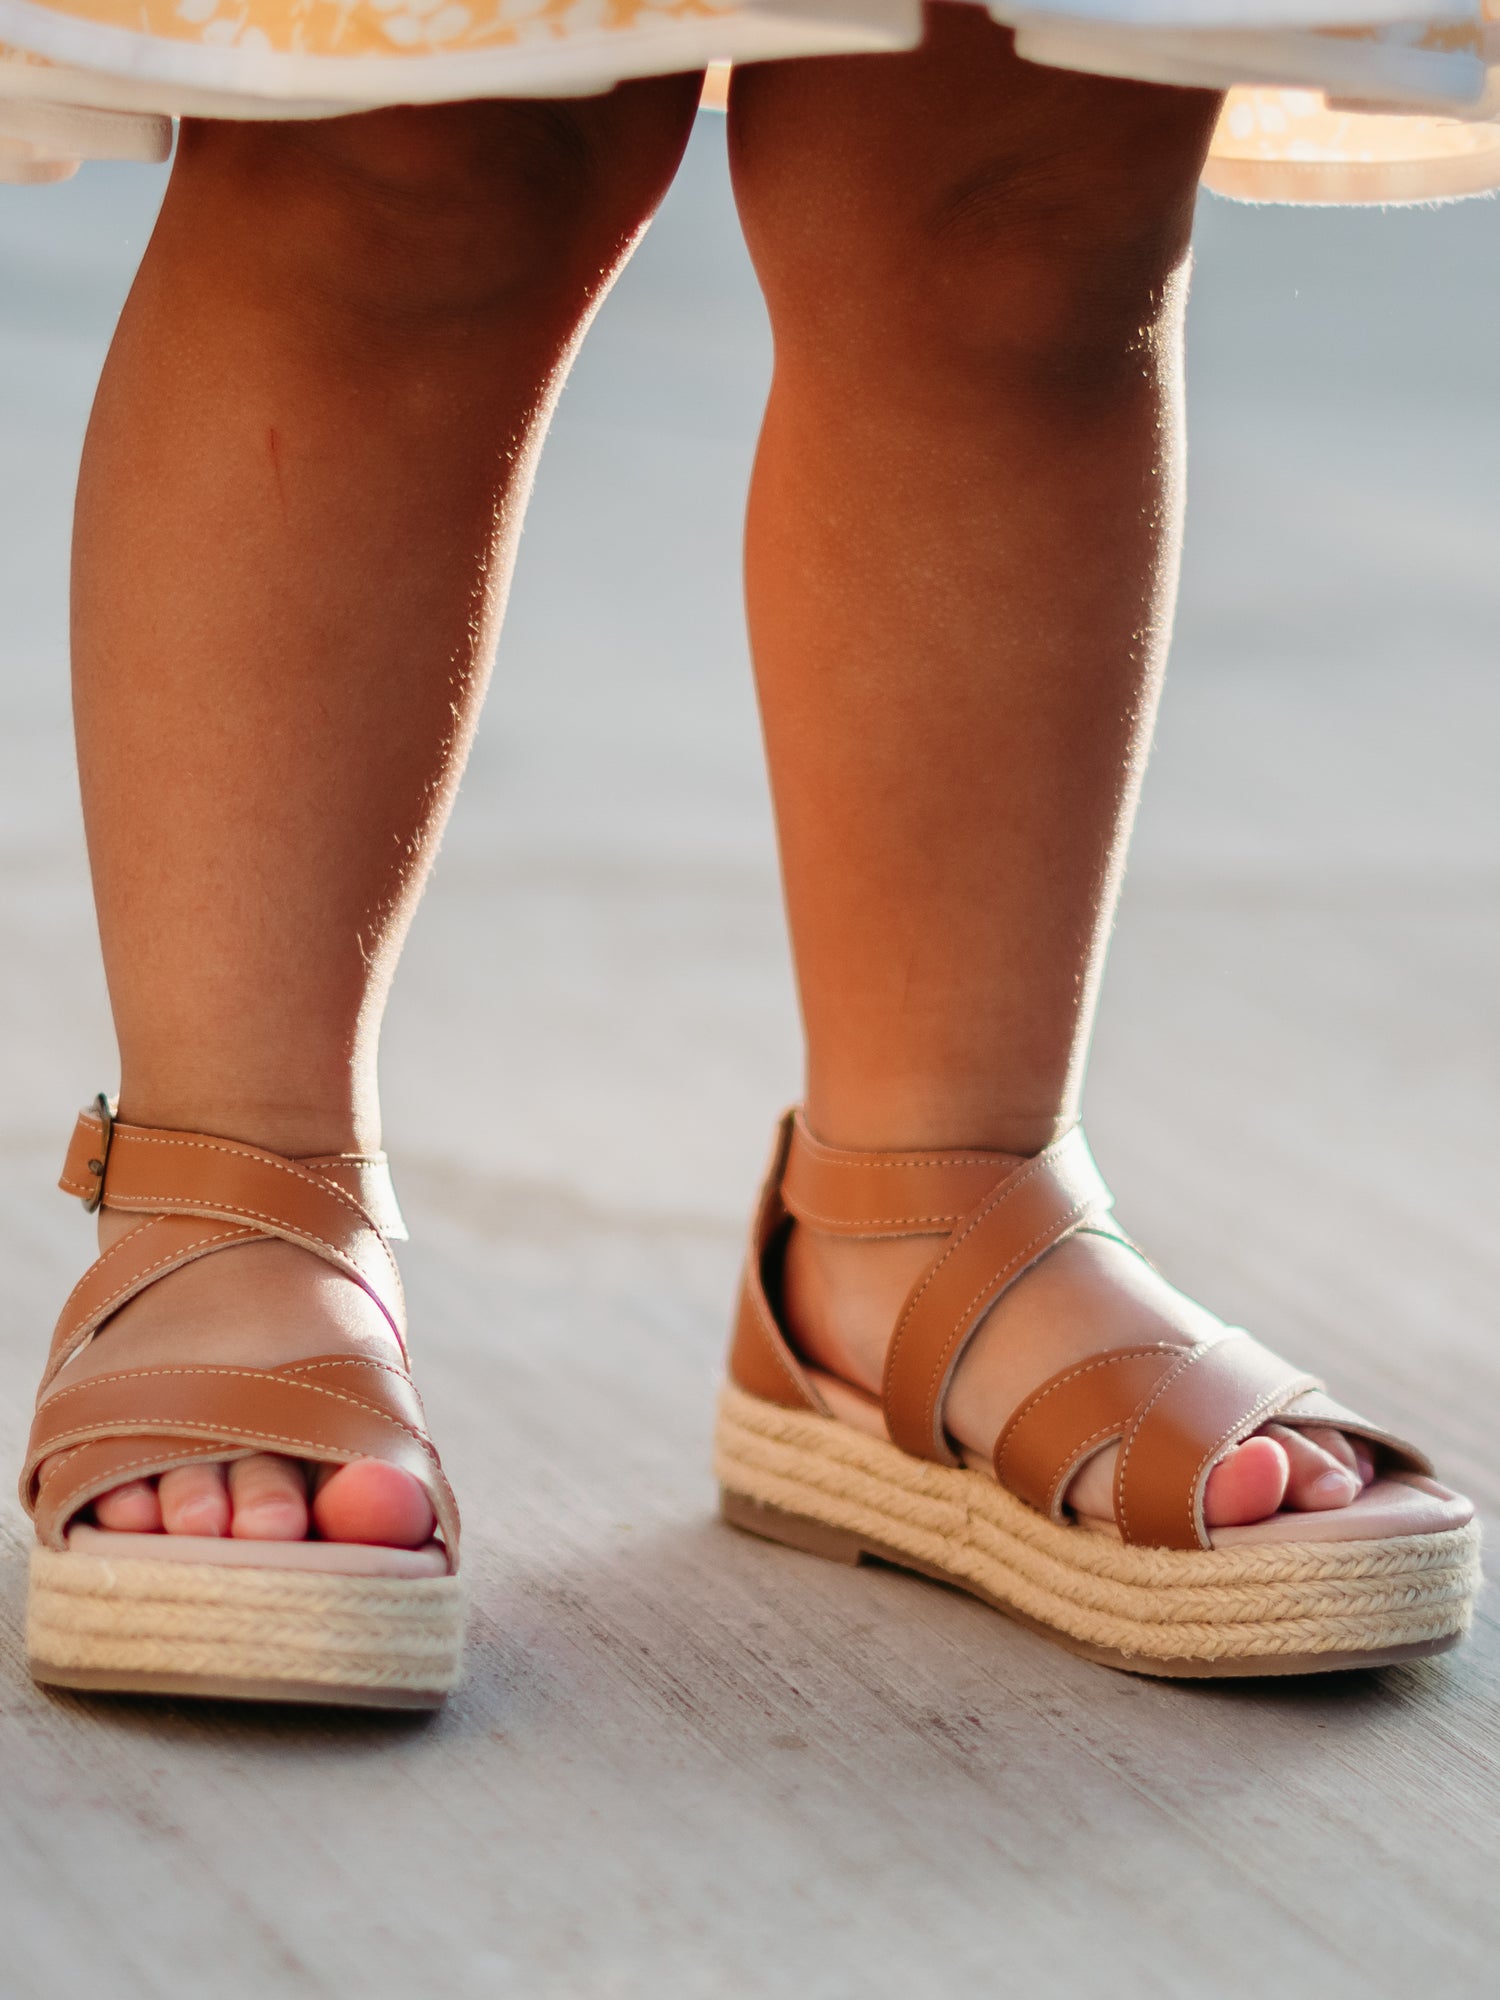 Closeup of a girl showing off her new sandals